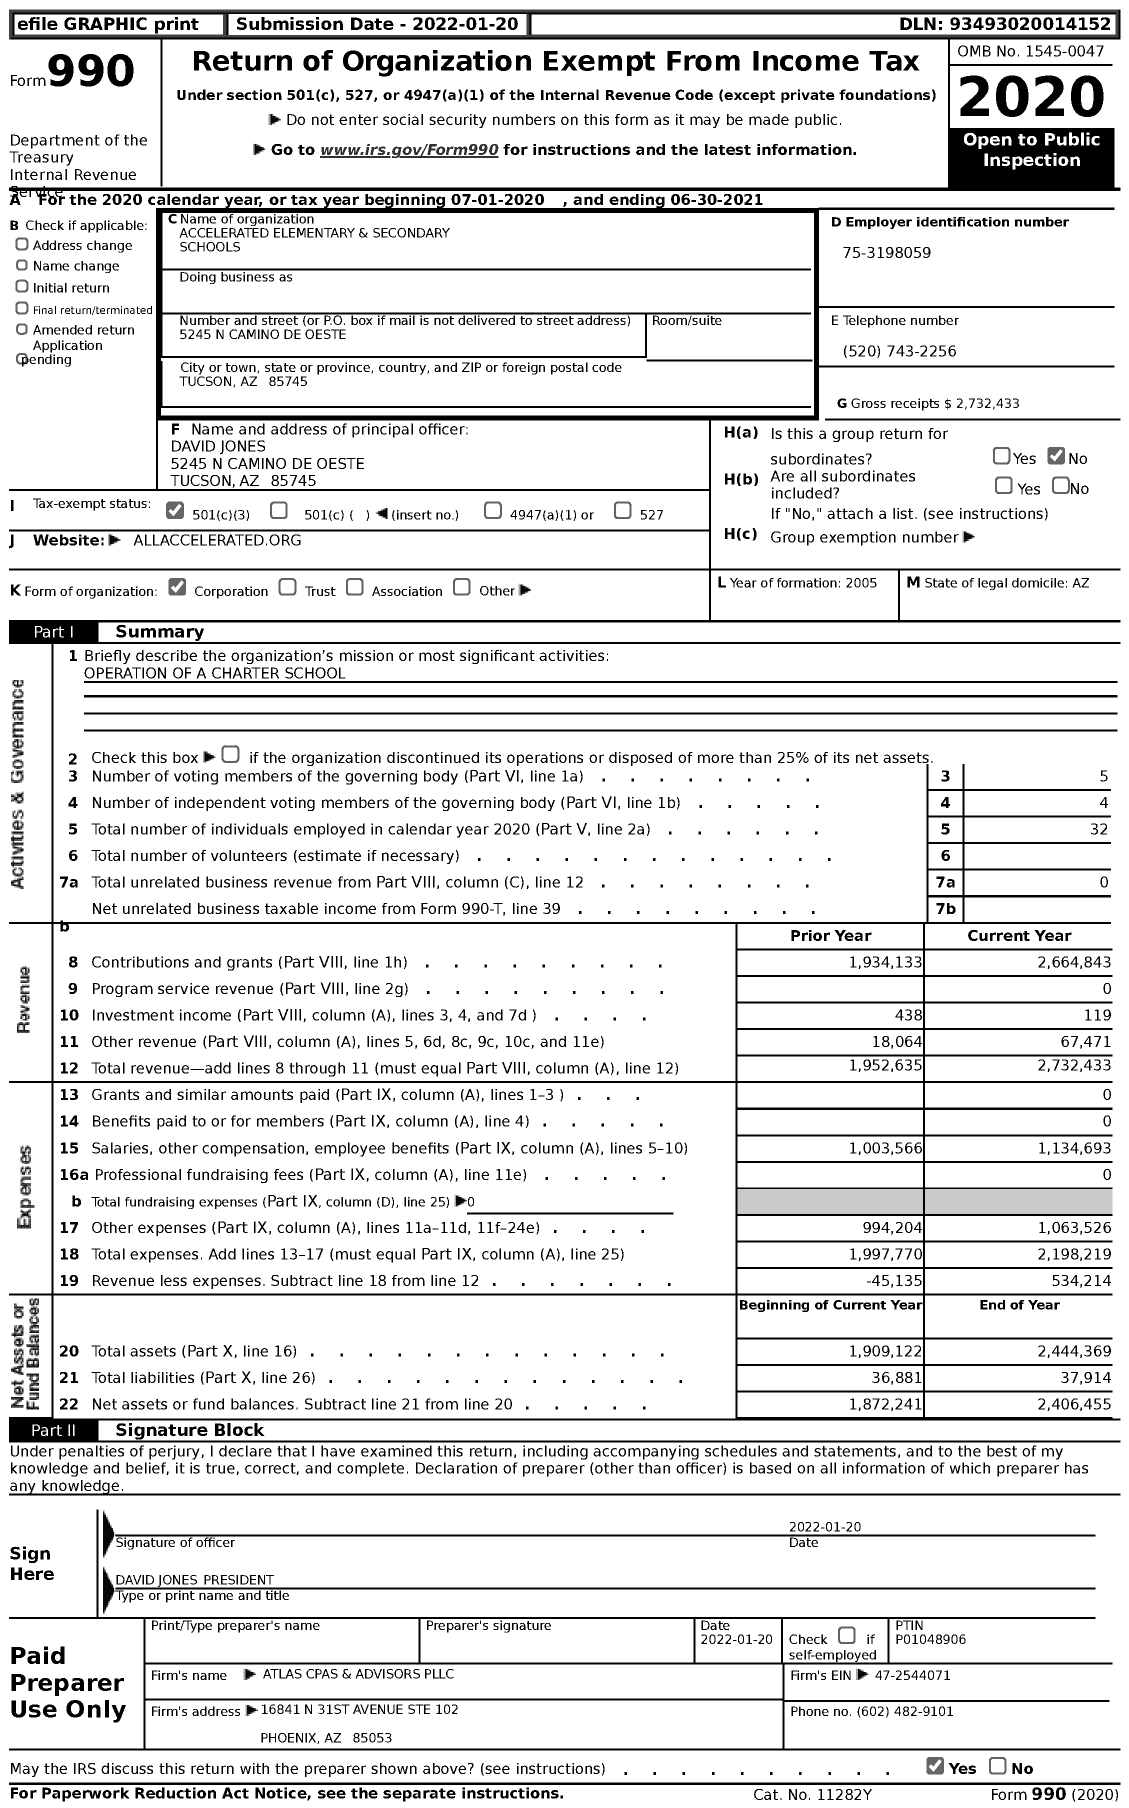 Image of first page of 2020 Form 990 for Accelerated Elementary and Secondary Schools